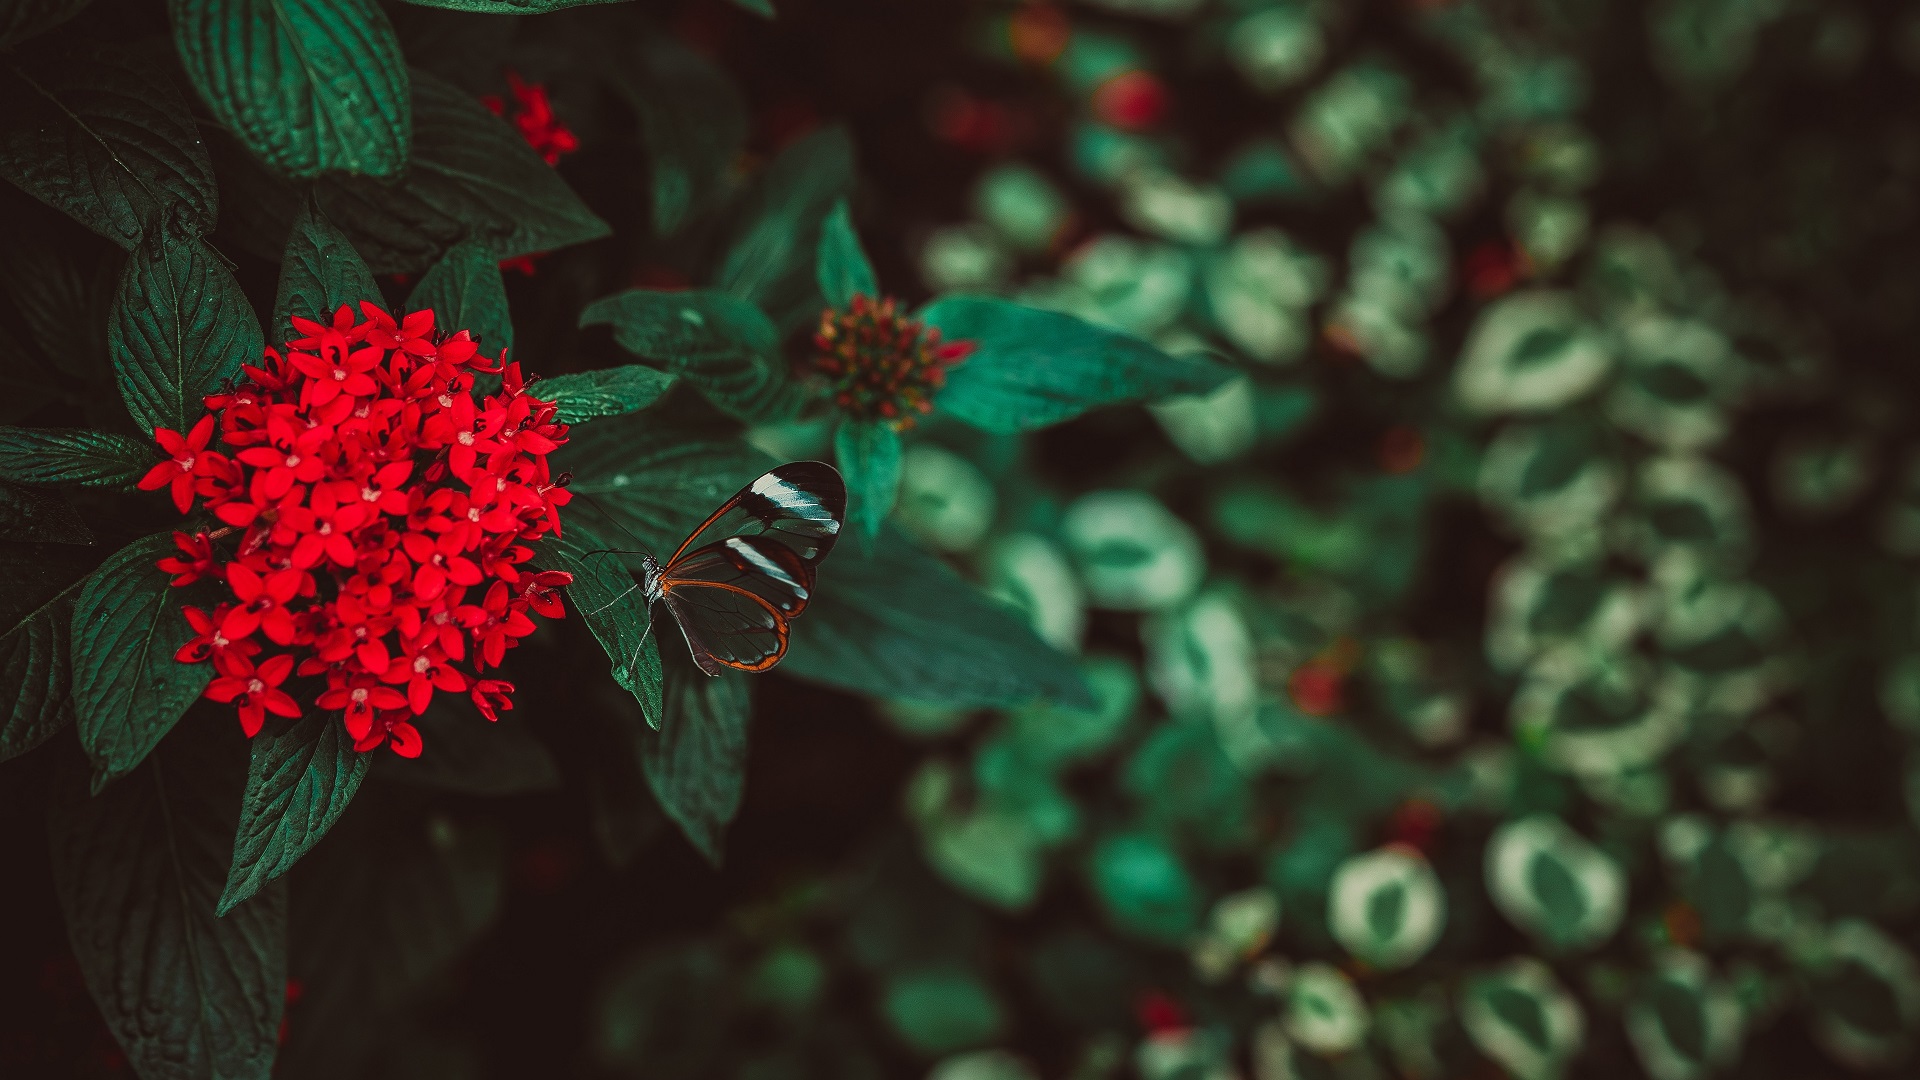 General 1920x1080 nature flowers butterfly depth of field red flowers leaves